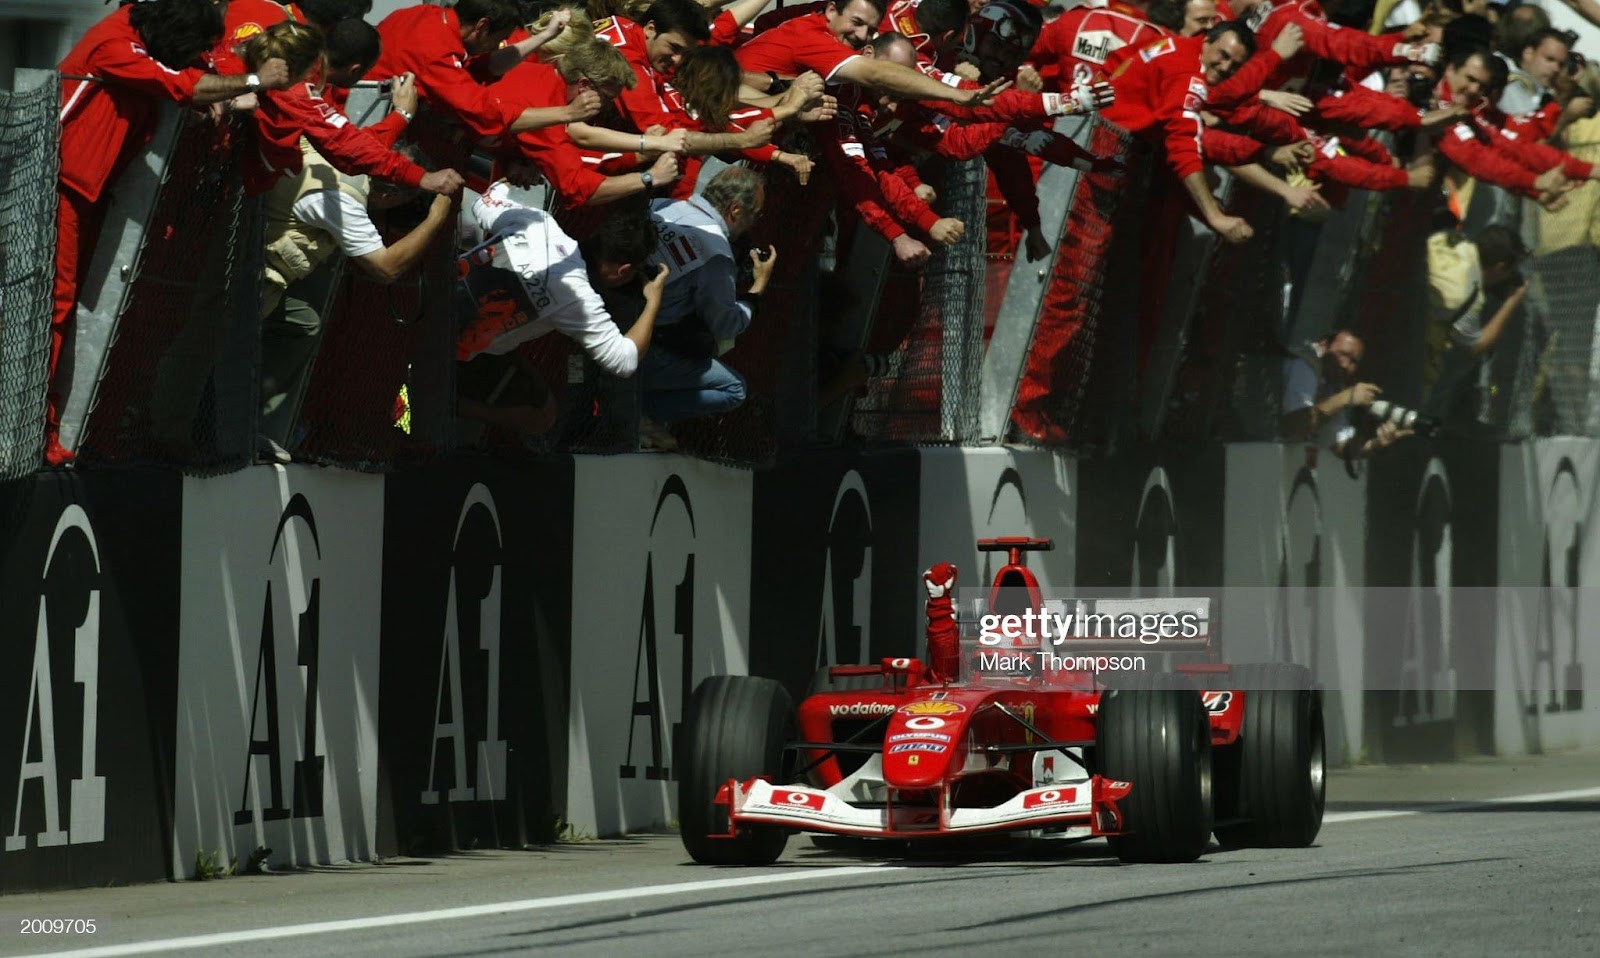 Michael Schumacher, Ferrari, crosses the finish line to win the Austrian Grand Prix on May 18, 2003 at the A1 Ring in Spielberg.